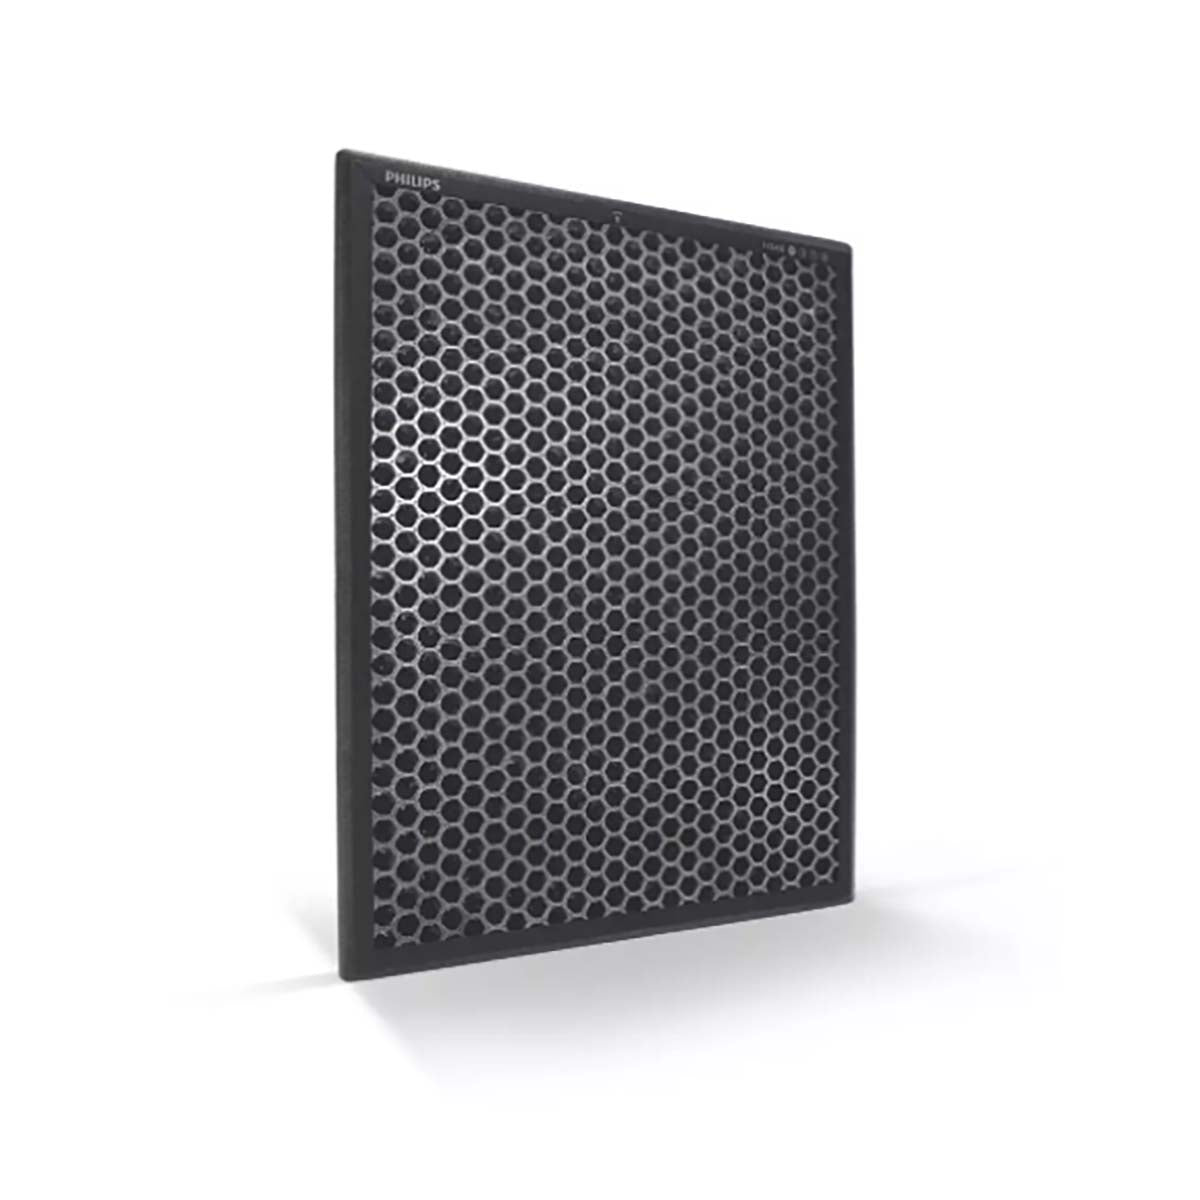 FY1413/30 Serie 1000 NanoProtect-Filter